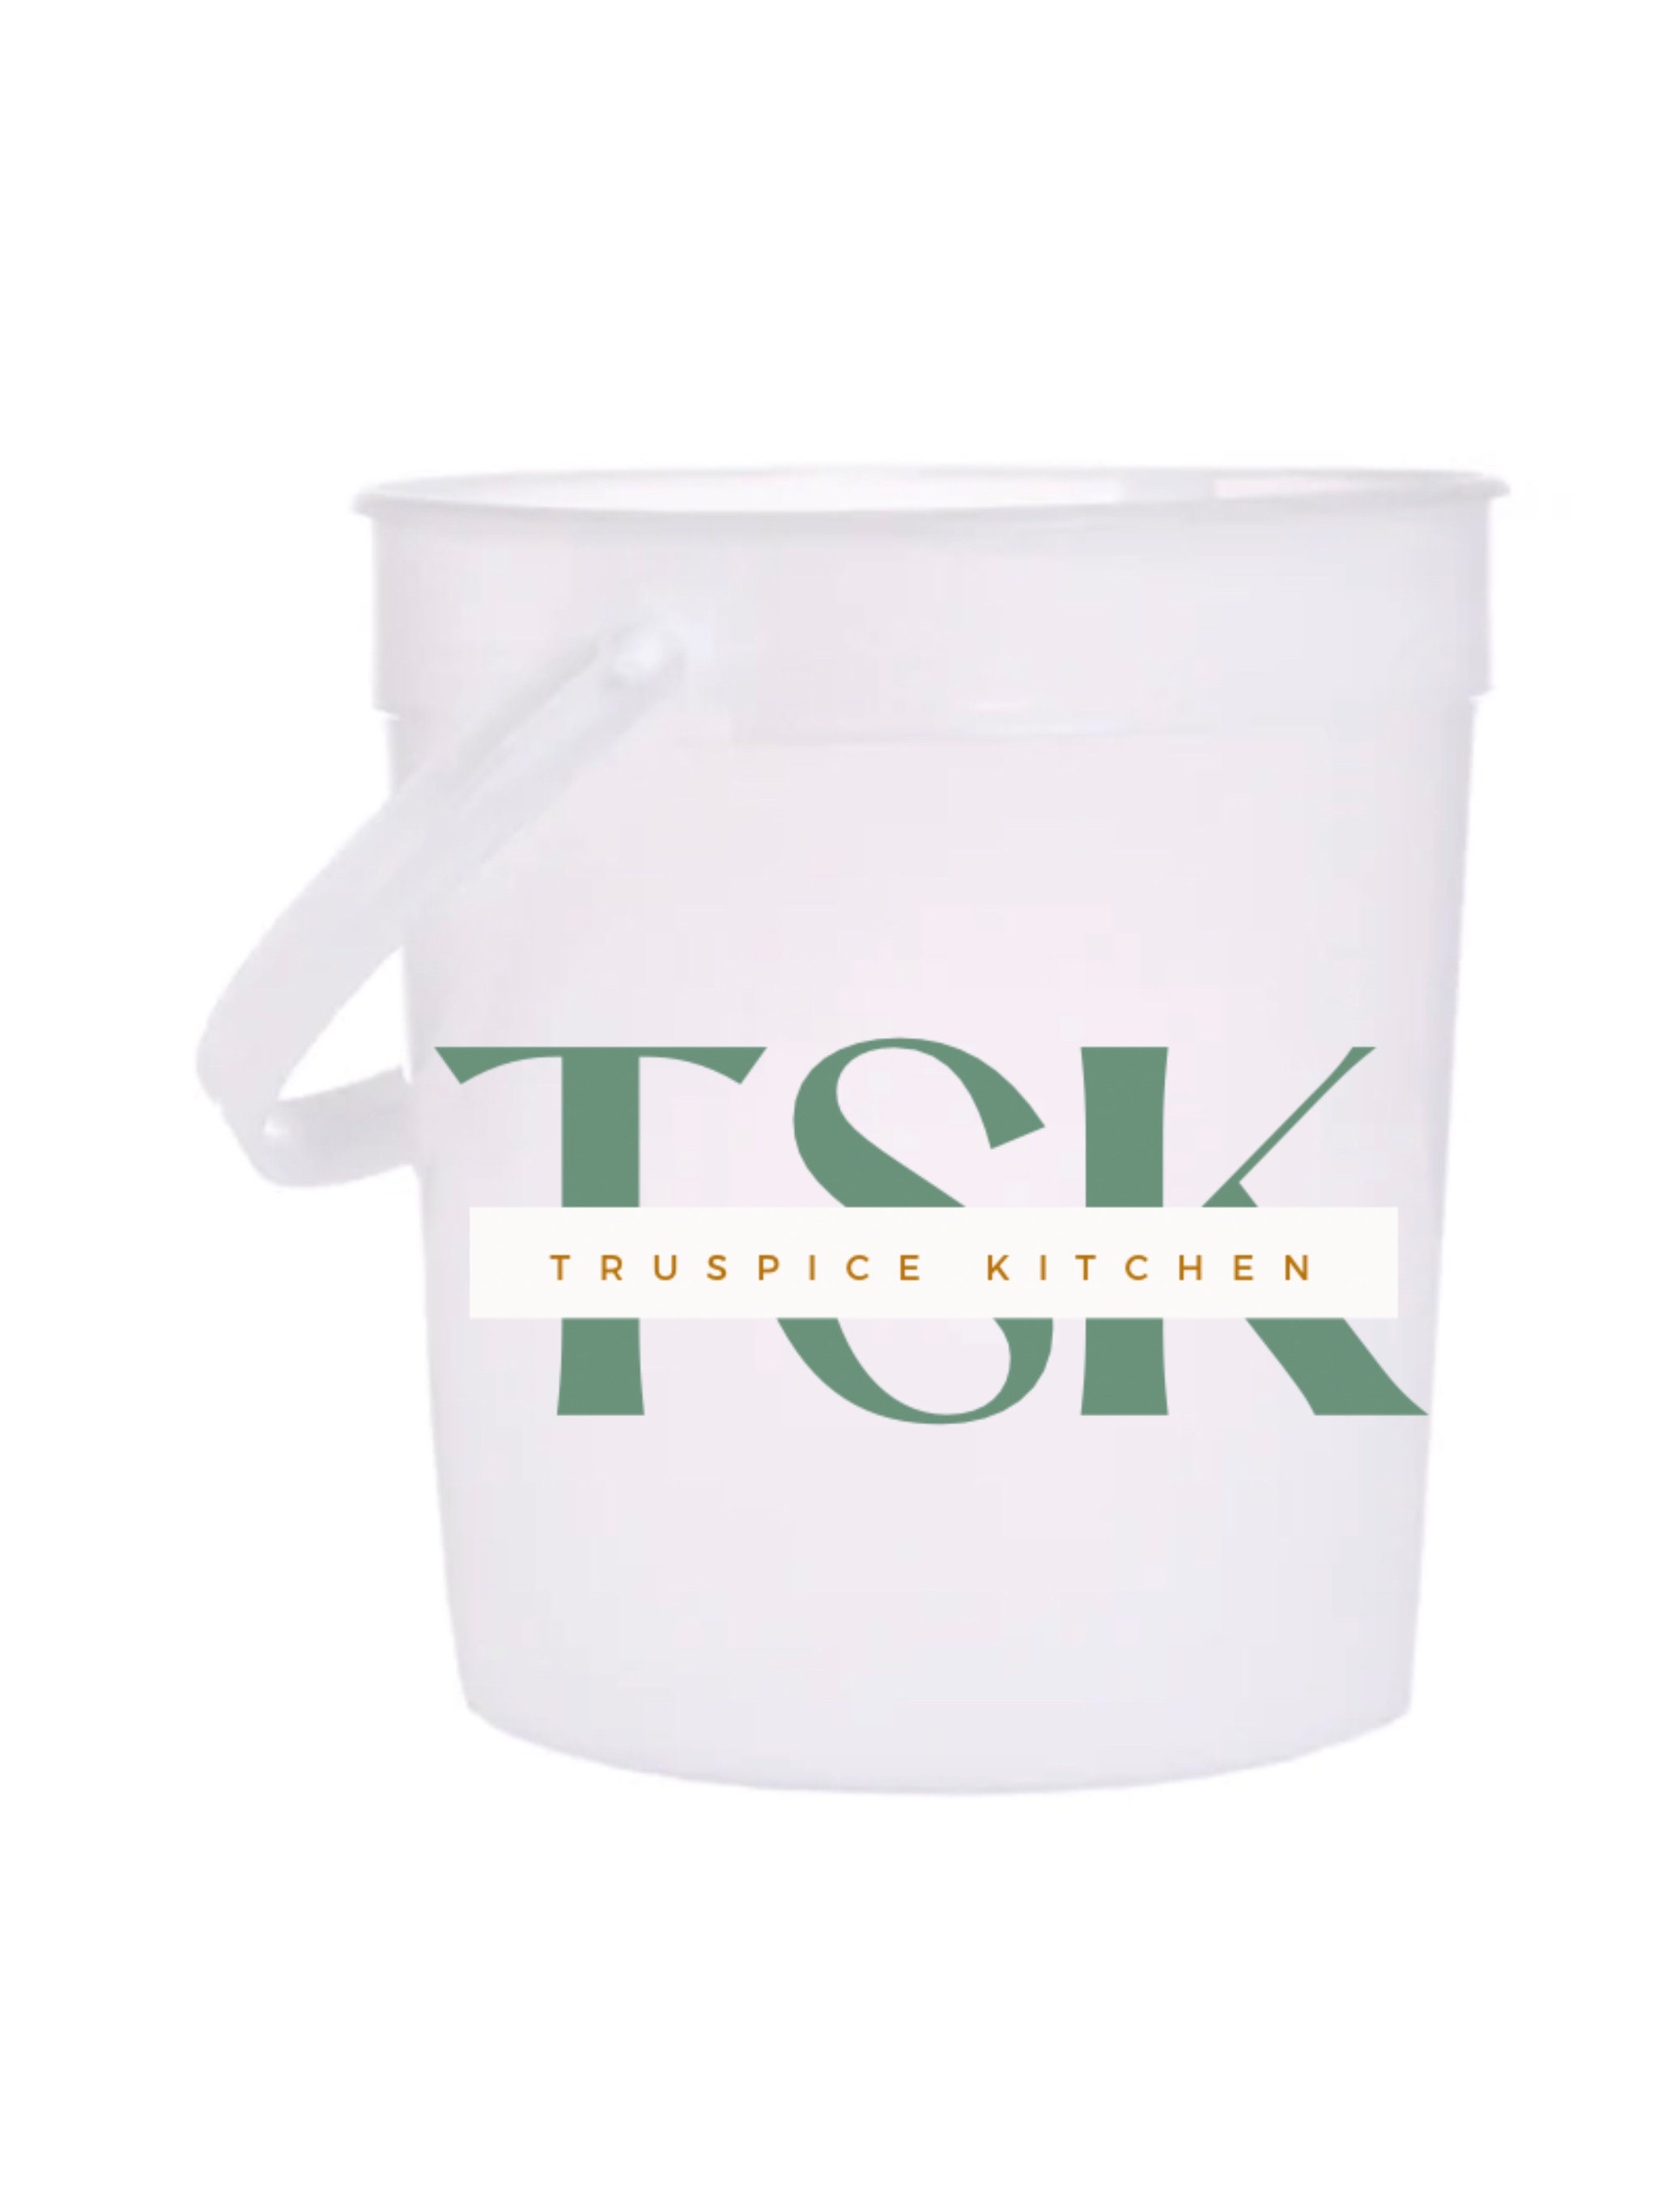 32oz Clear Plastic Buckets with Handle Drink Rum Buckets Parties